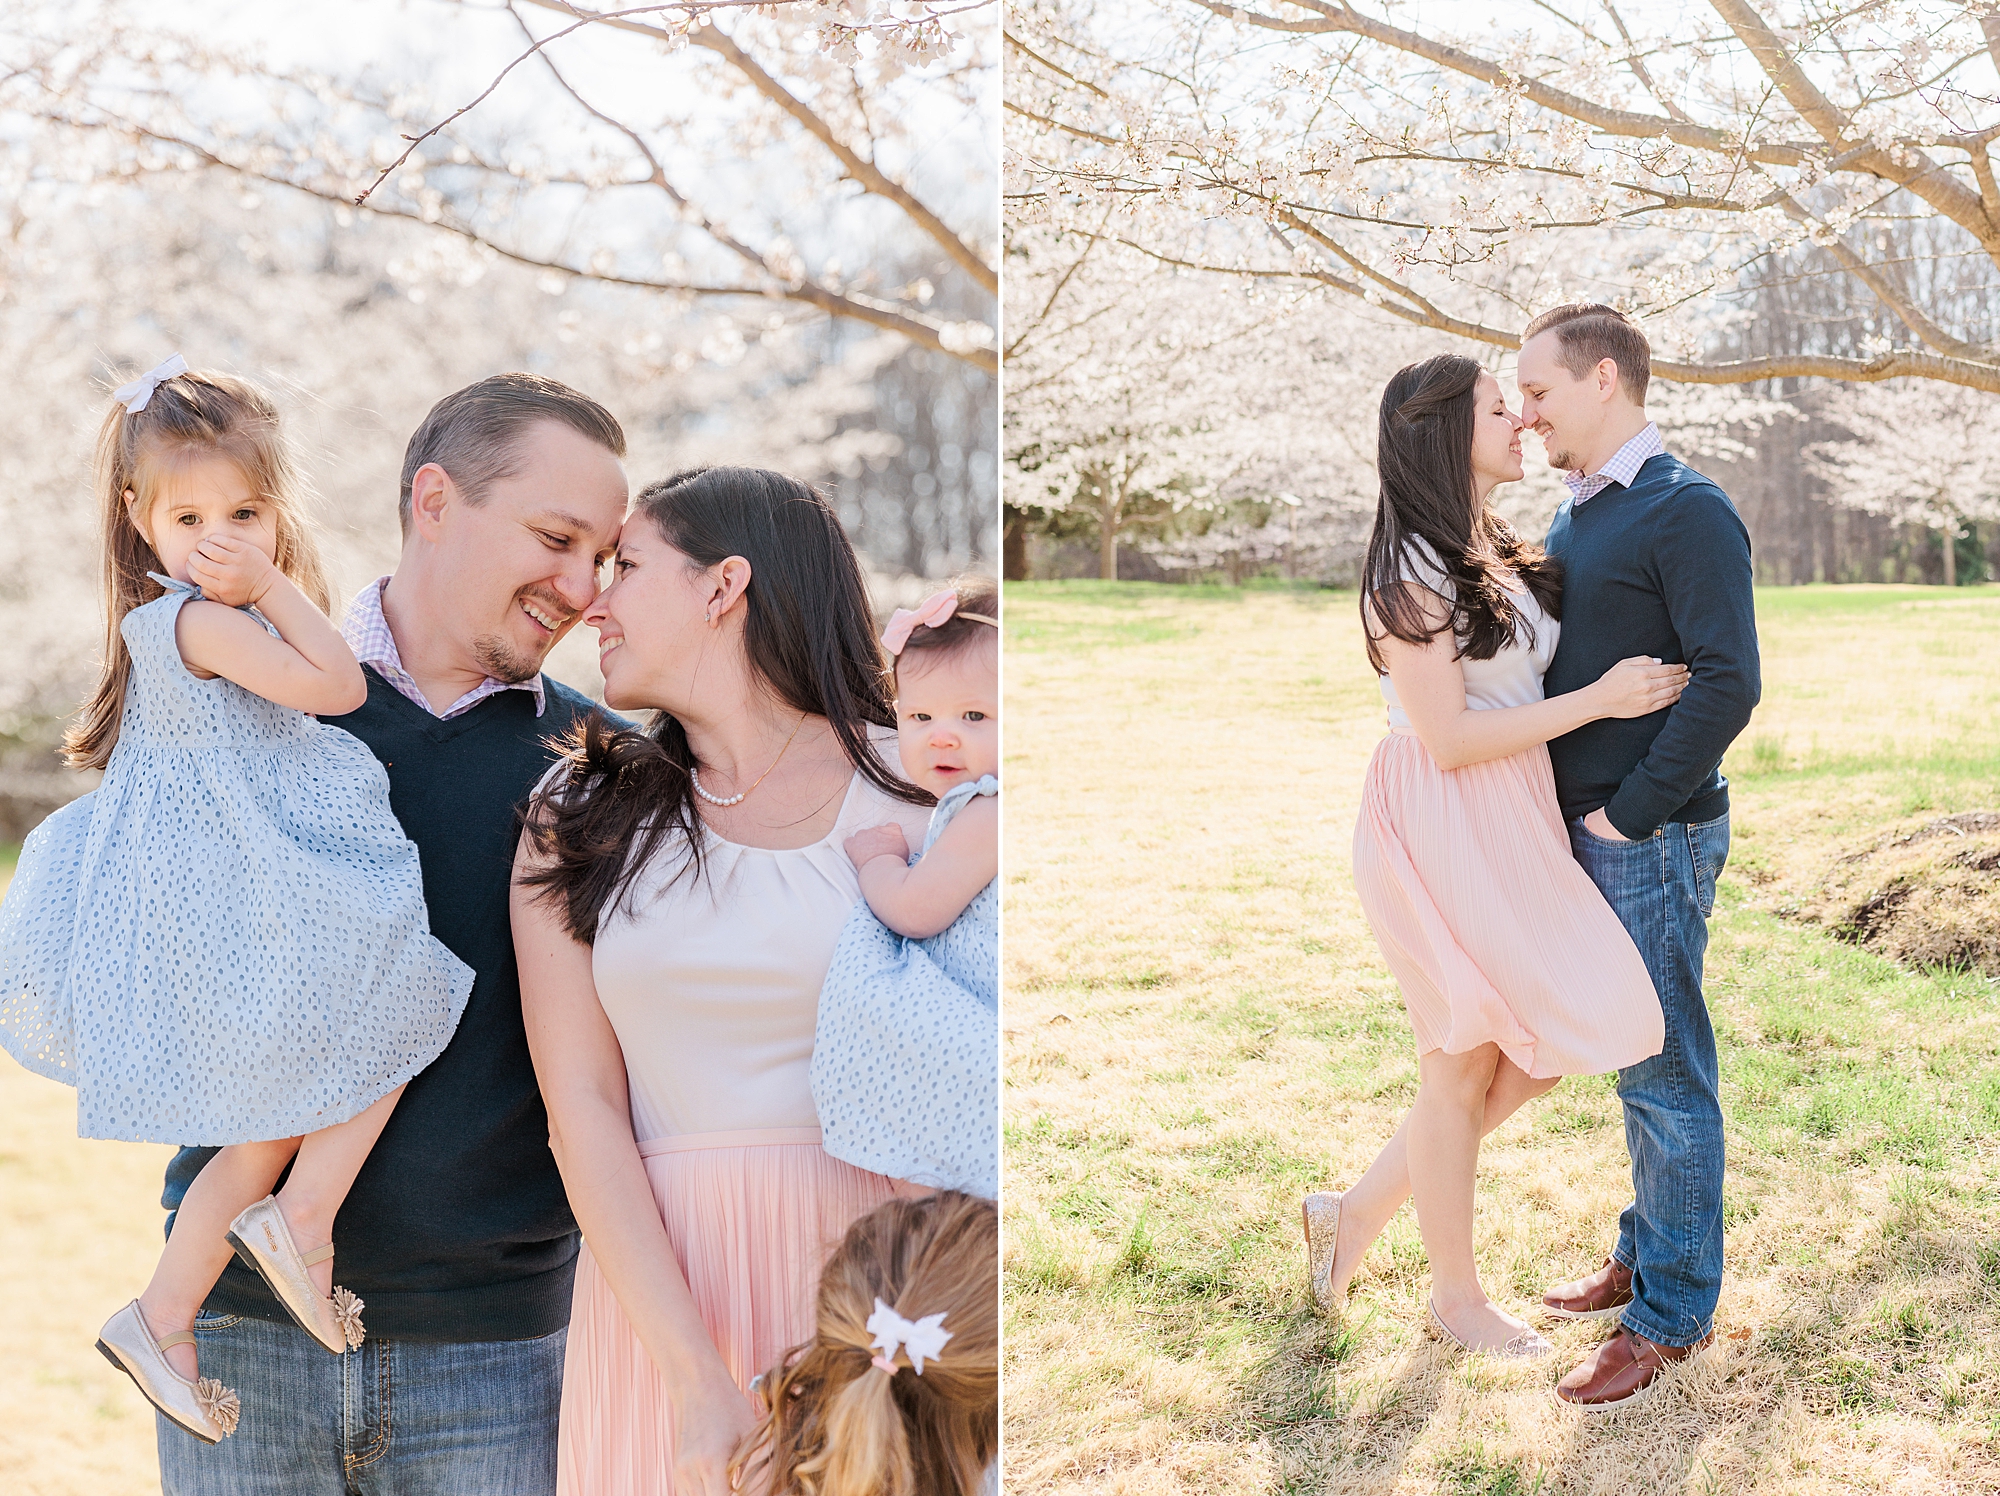 parents hug under cherry blossom tree with daughters in blue dresses hugging them